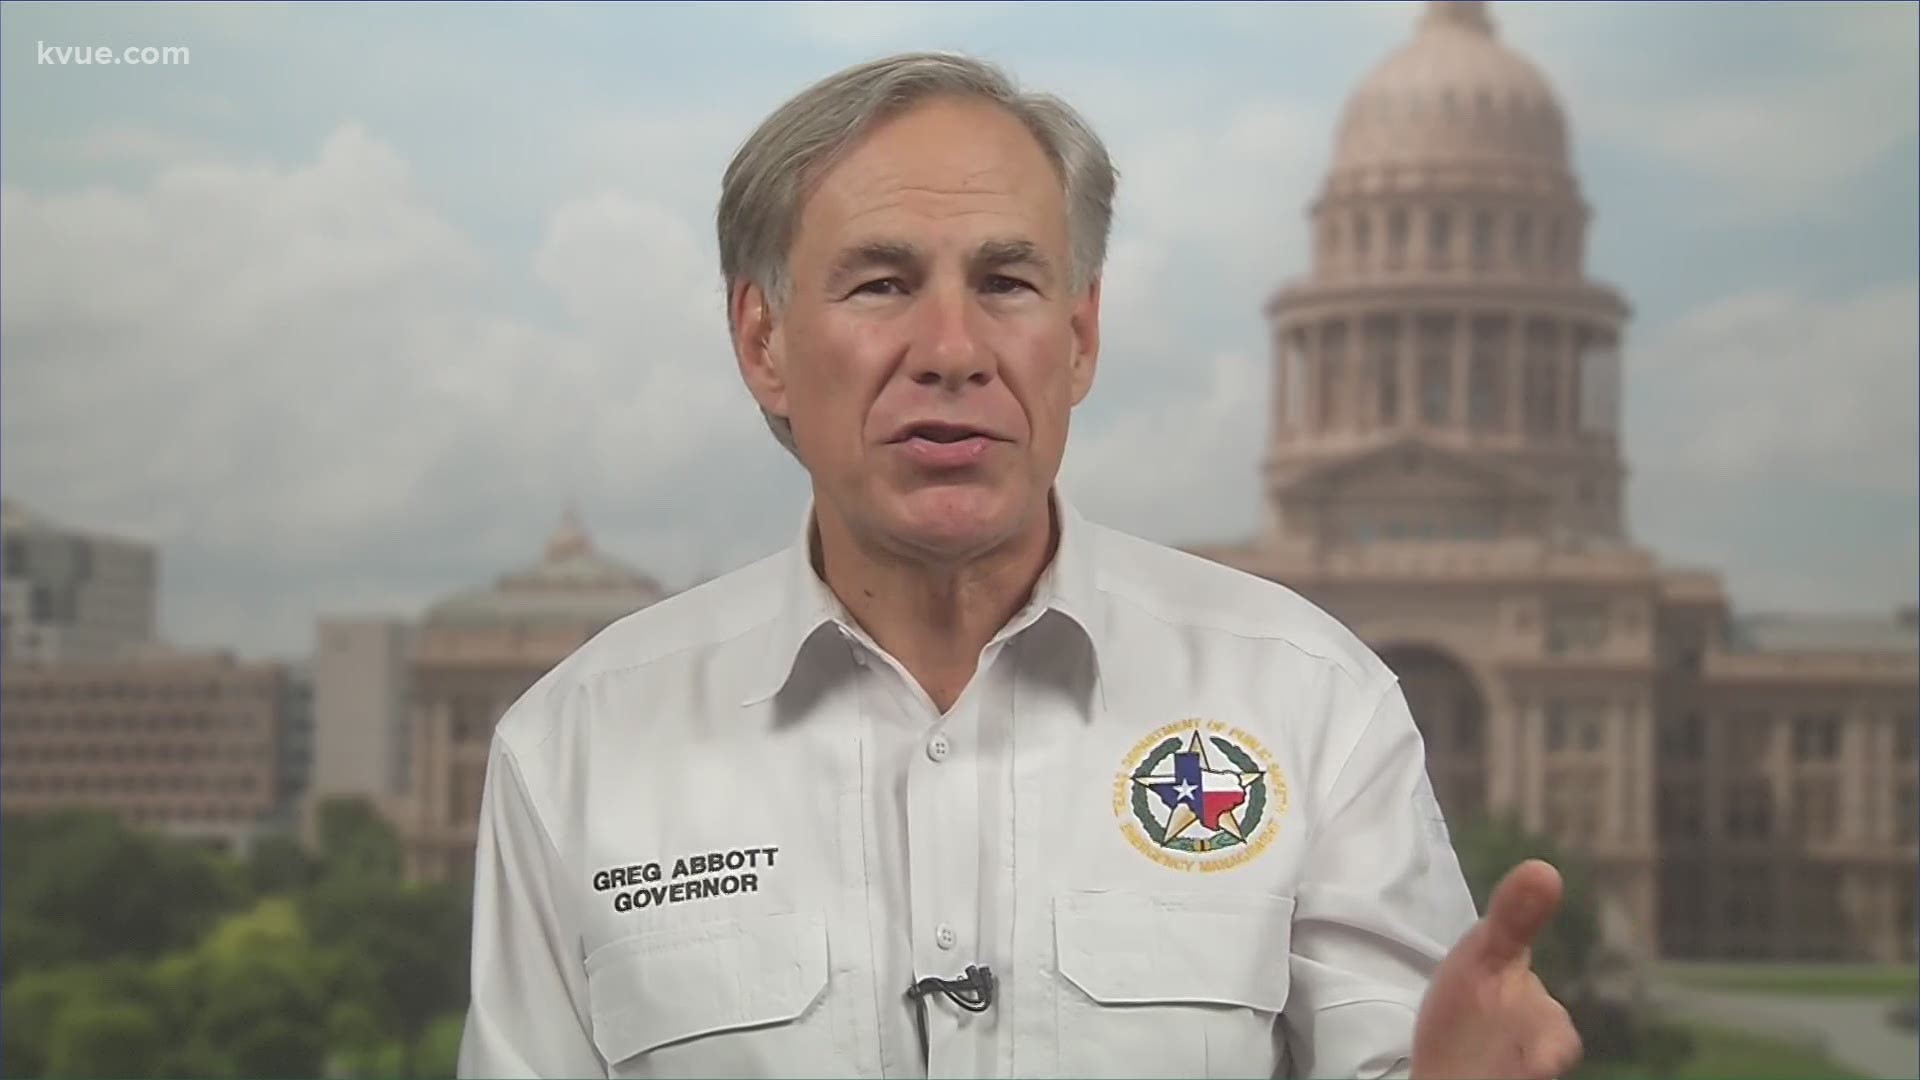 Gov. Abbott joins KVUE on June 5 to discuss the state's ongoing protests.